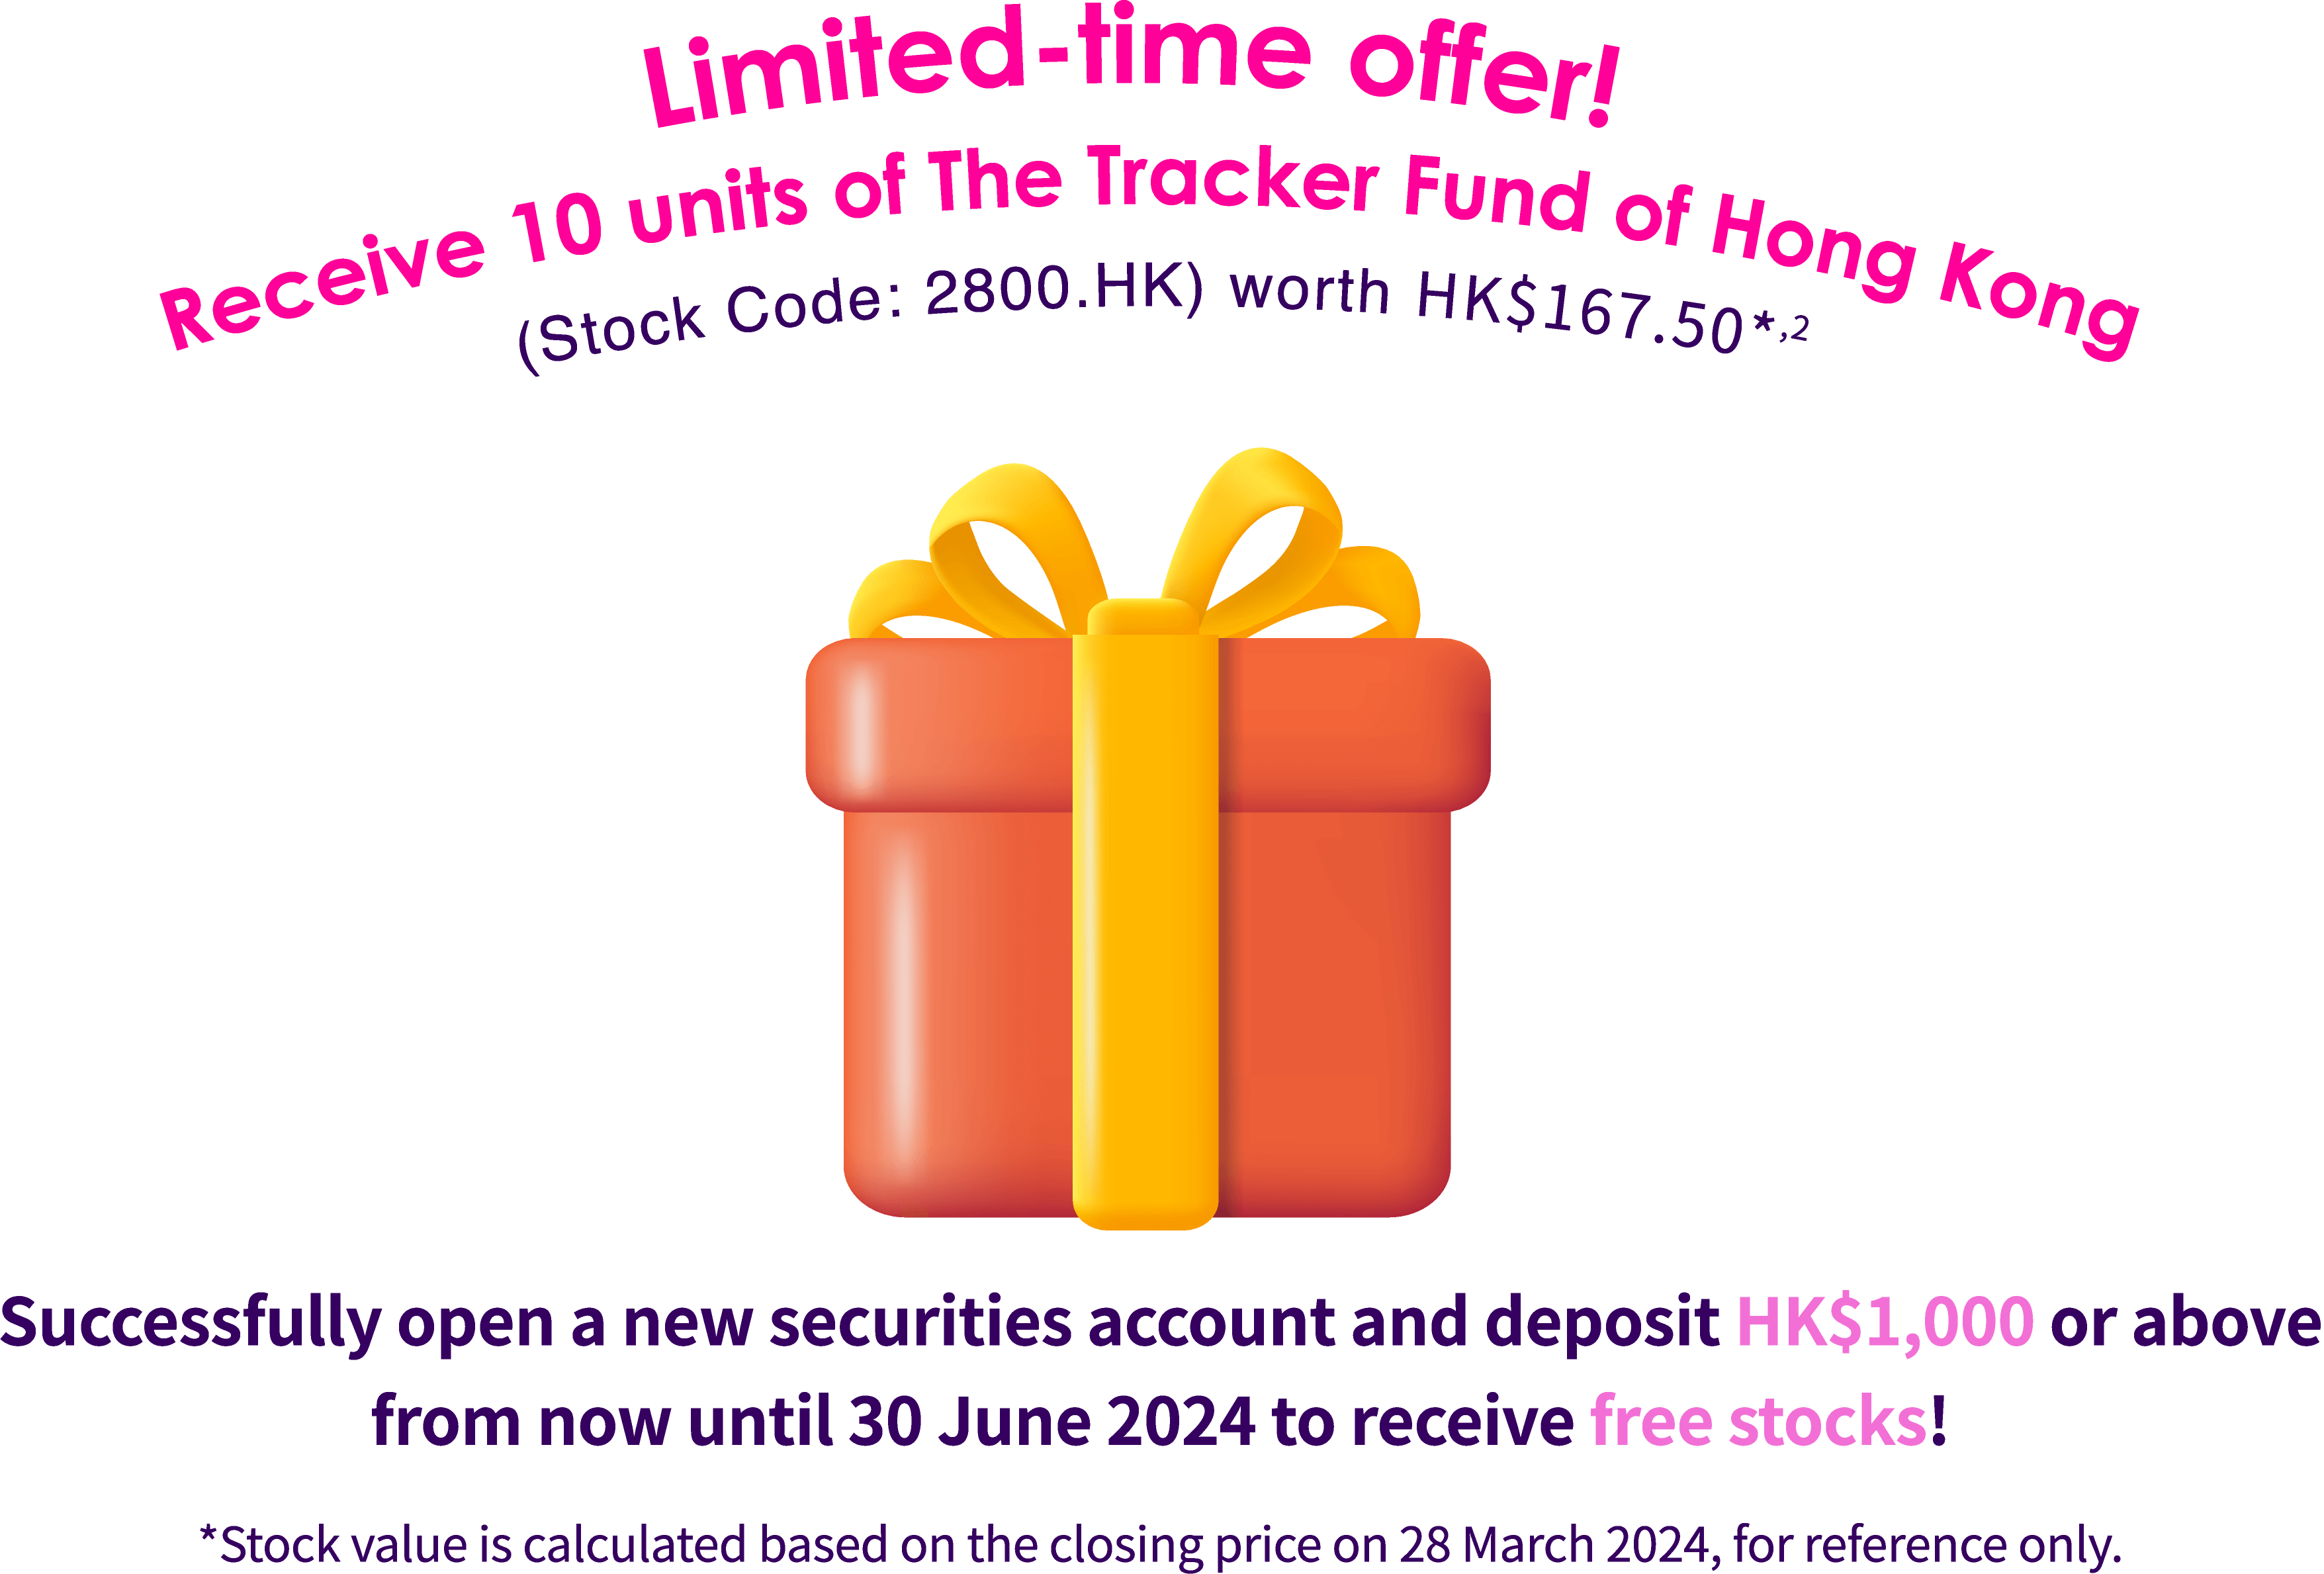 Limited-time offer! Receive 10 units of The Tracker Fund of Hong Kong (Stock Code: 2800.HK) worth HK$172.30* (Quota: 6,888) Join TrendyTogether and successfully open a new securities account from now until 31 March 2024 to receive your free Tracker Fund units. *Stock value is calculated based on the closing price on 28 December 2023, for reference only.